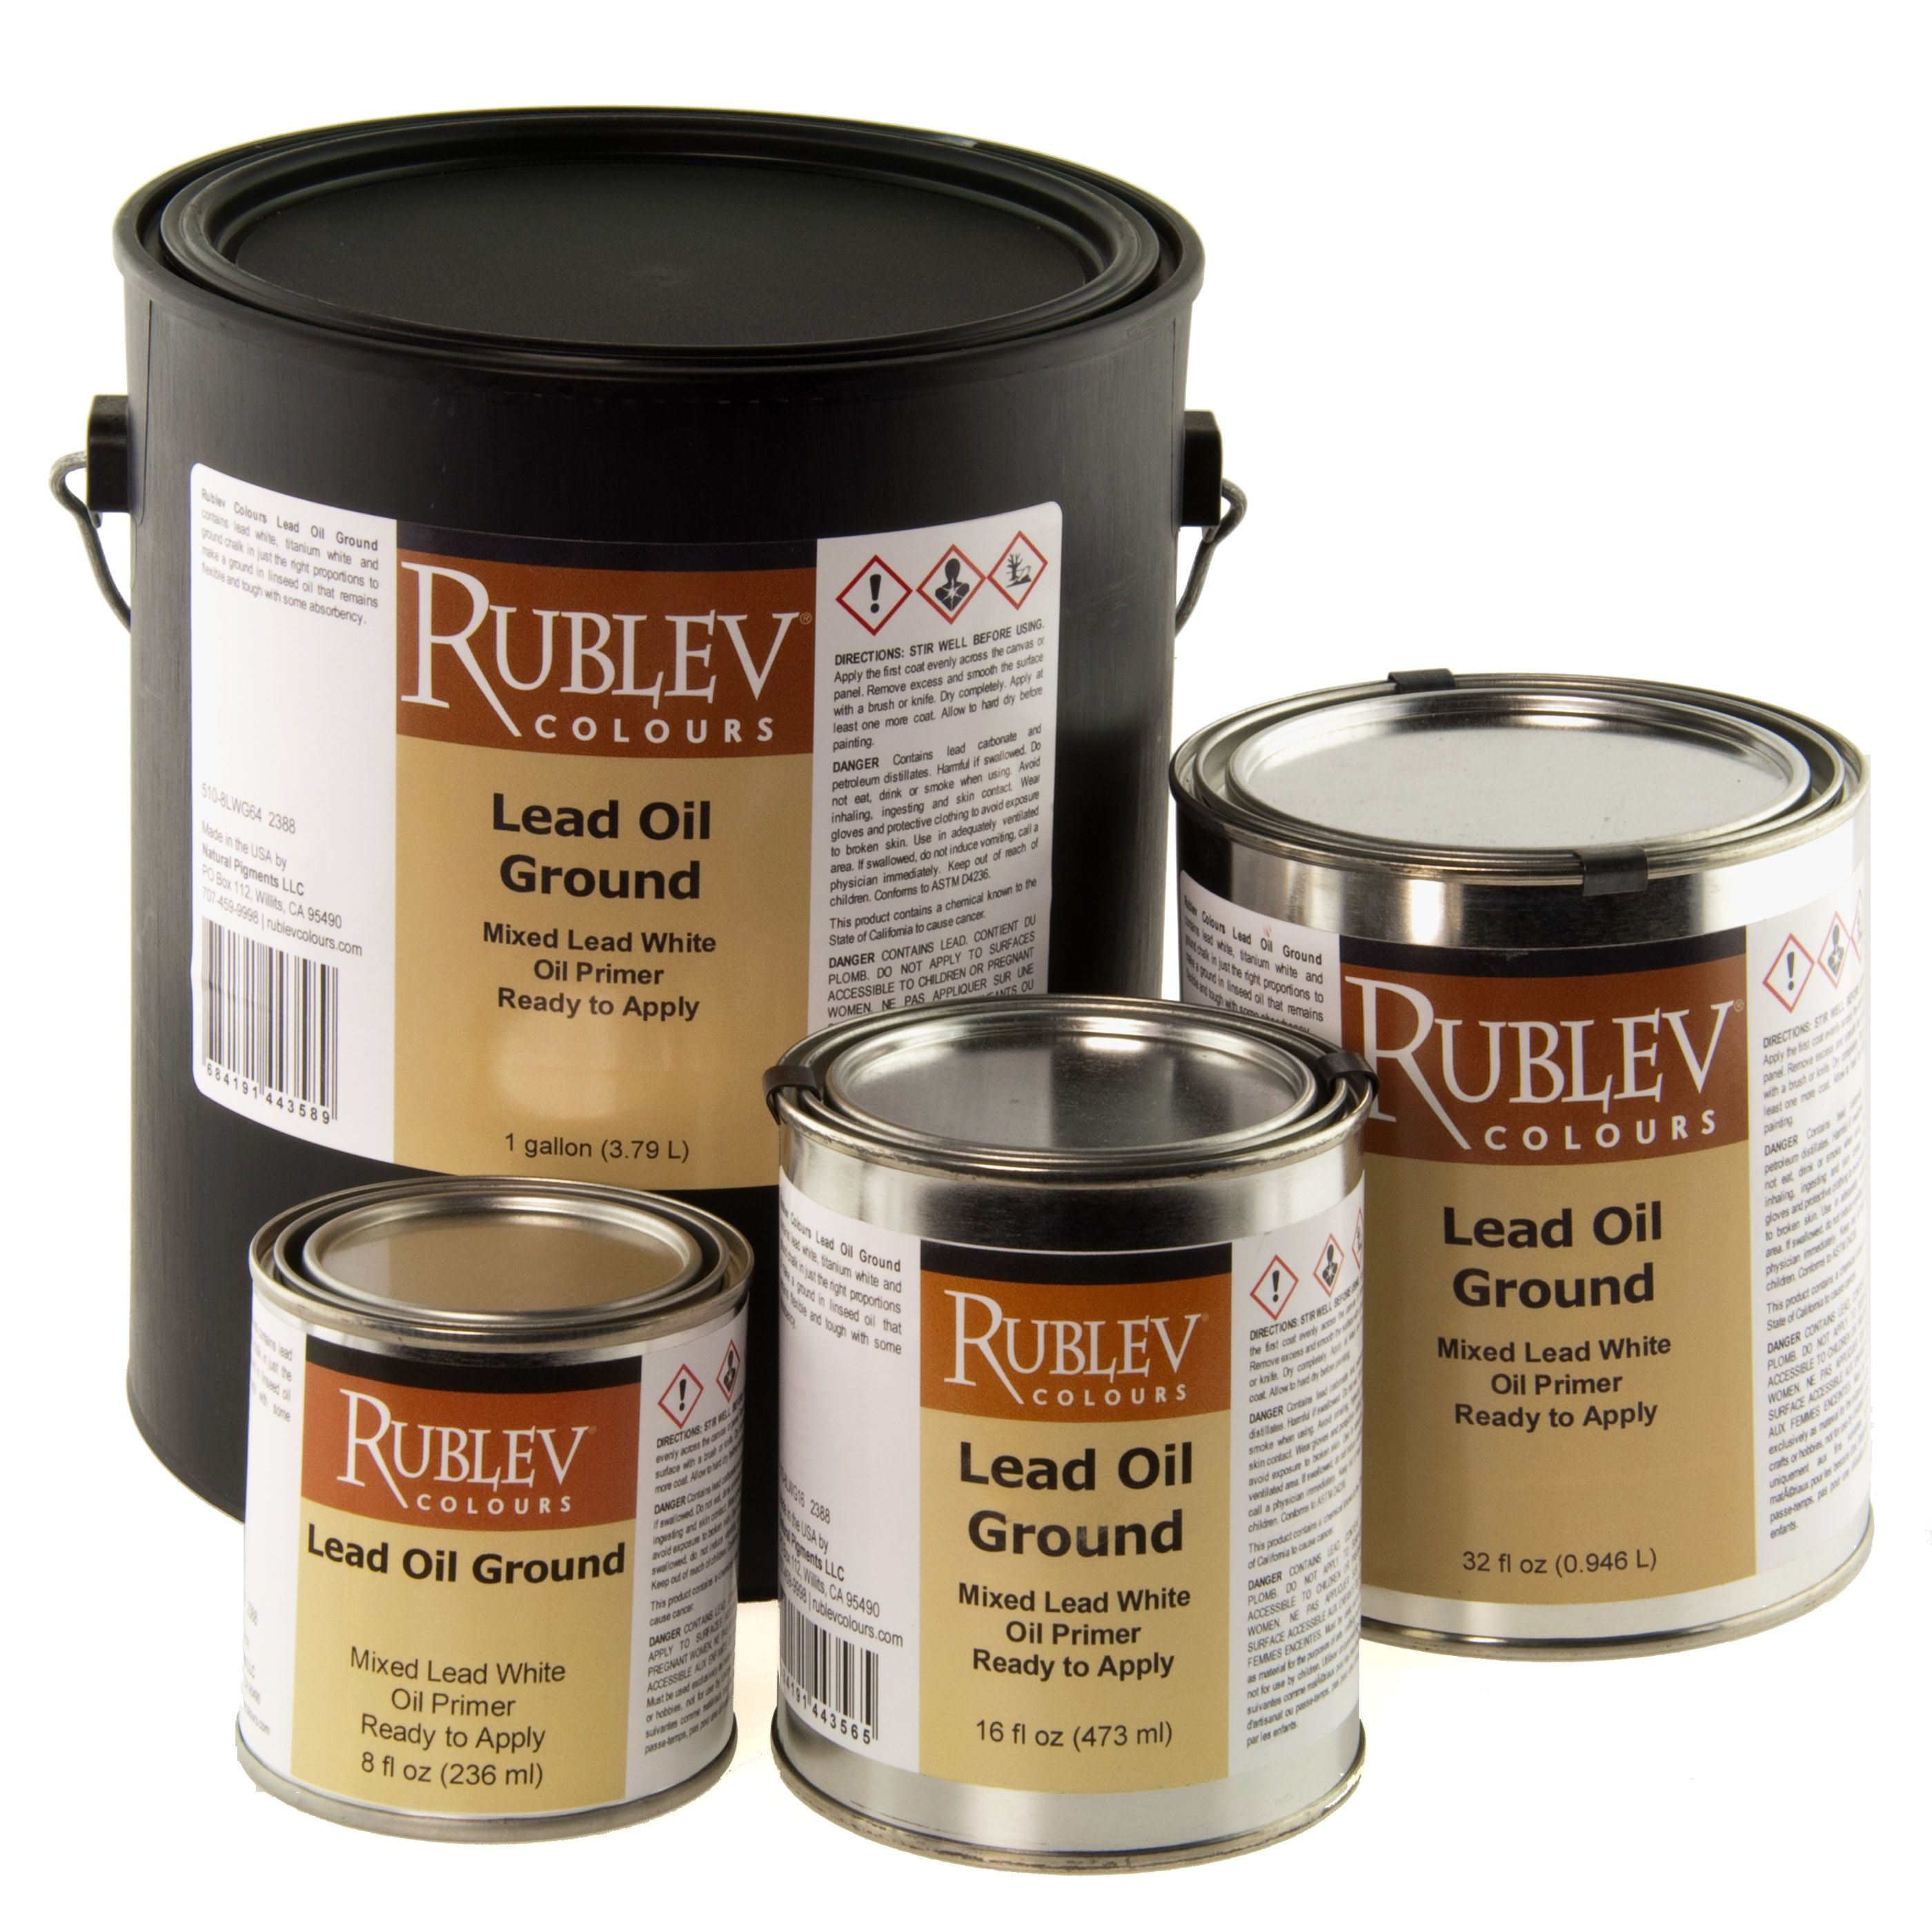 Rublev Colours Lead Oil Ground